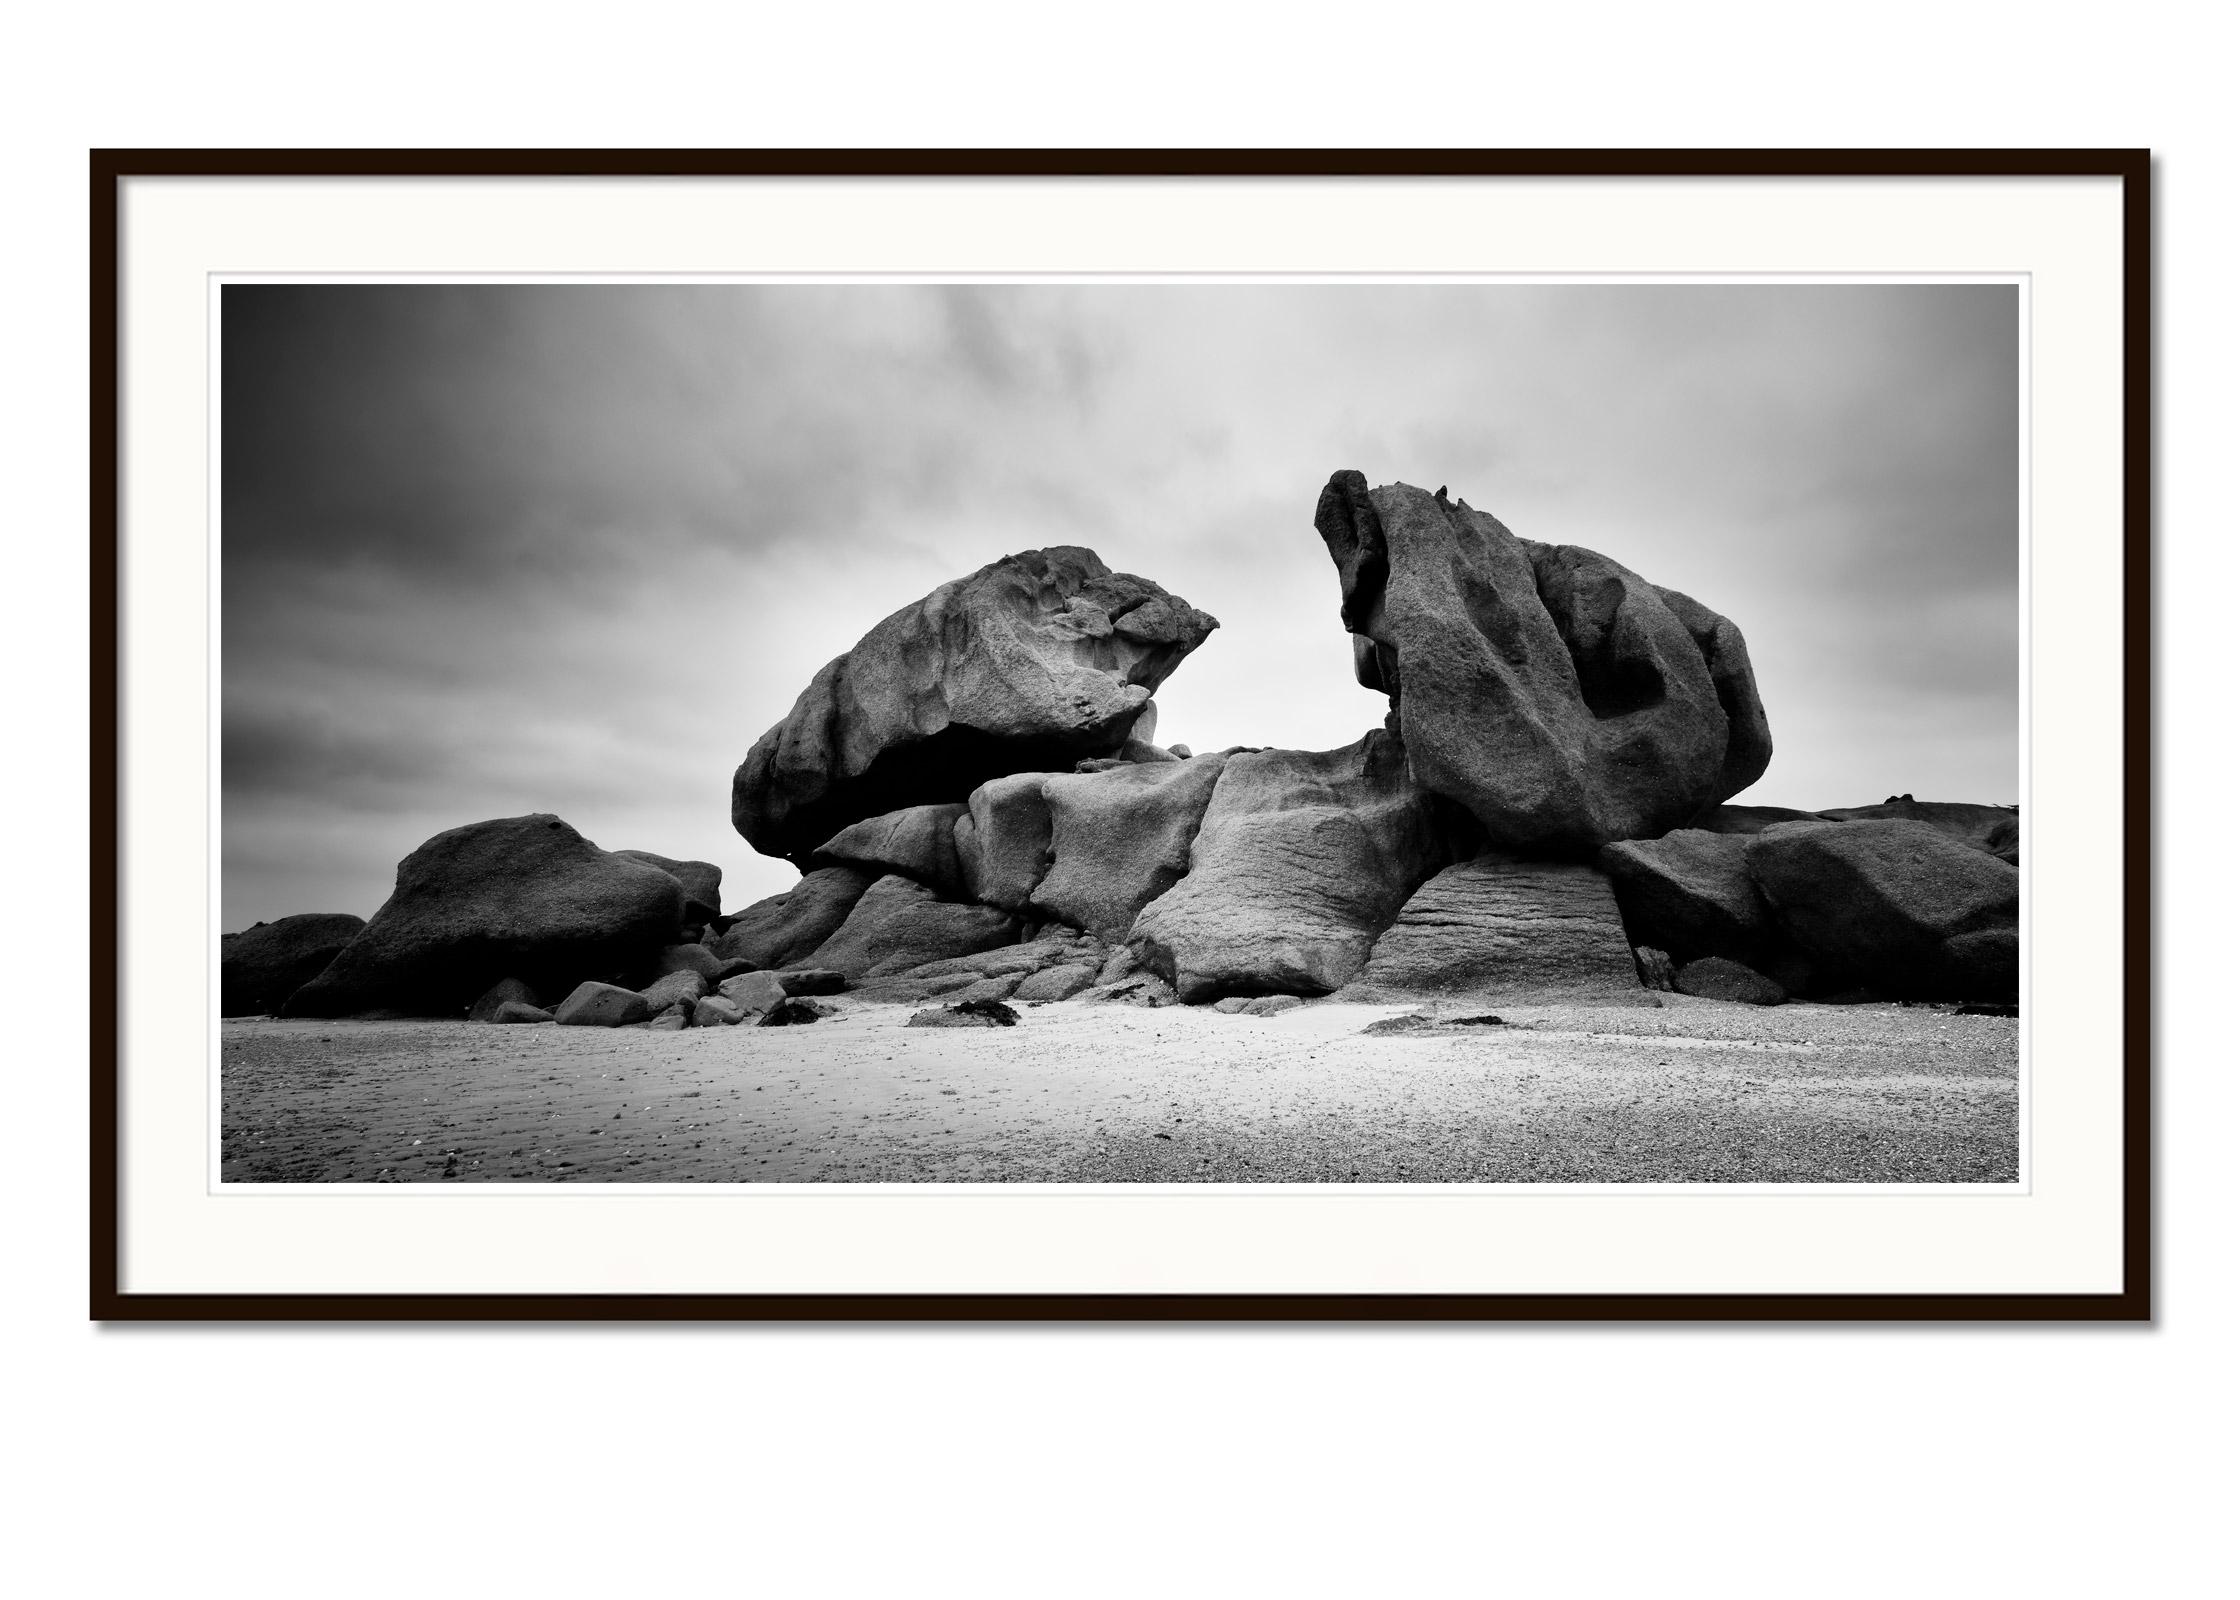 Black and white fine art panorama landscape photography. Unique rock formation on the pink granite coast in France. Archival pigment ink print, edition of 9. Signed, titled, dated and numbered by artist. Certificate of authenticity included. Printed